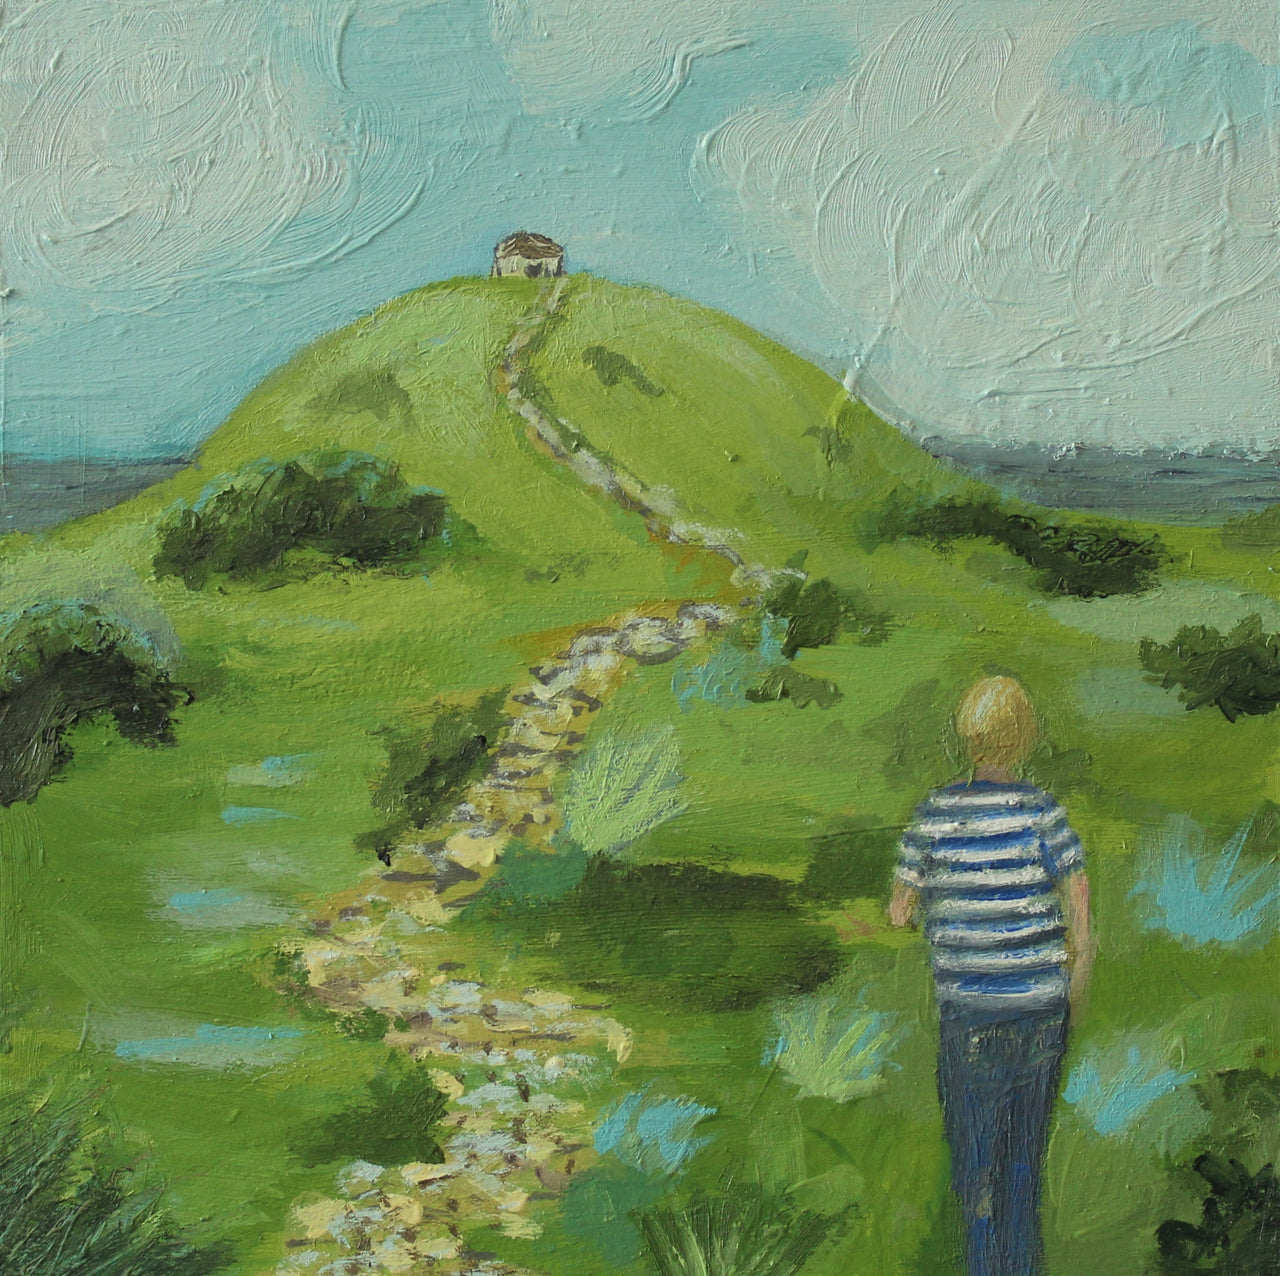 A figure in a stripy blue and white top walking towards a building on top of a hill with a footpath leading to the building by Cornish artist Siobhan Purdy